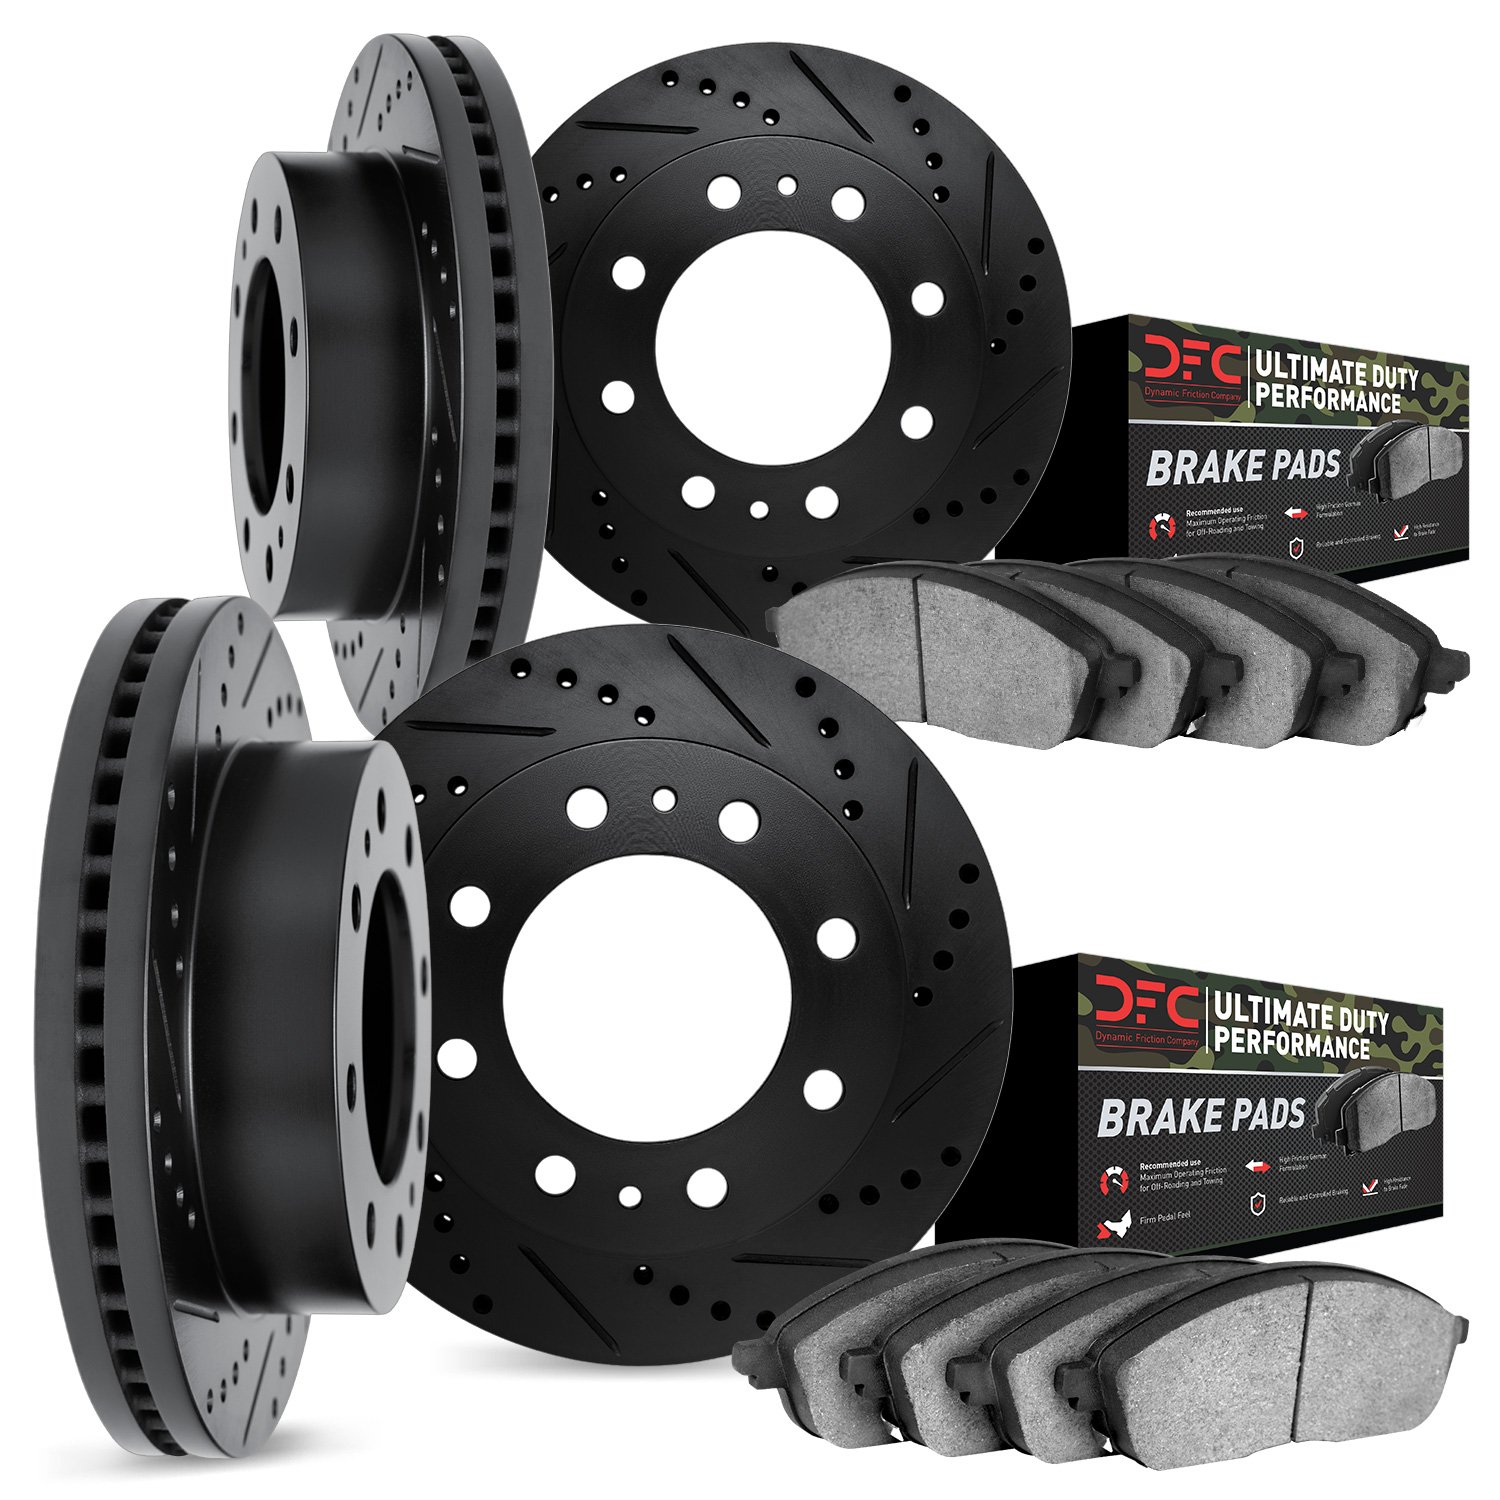 8404-48011 Drilled/Slotted Brake Rotors with Ultimate-Duty Brake Pads Kit [Black], 2001-2010 GM, Position: Front and Rear